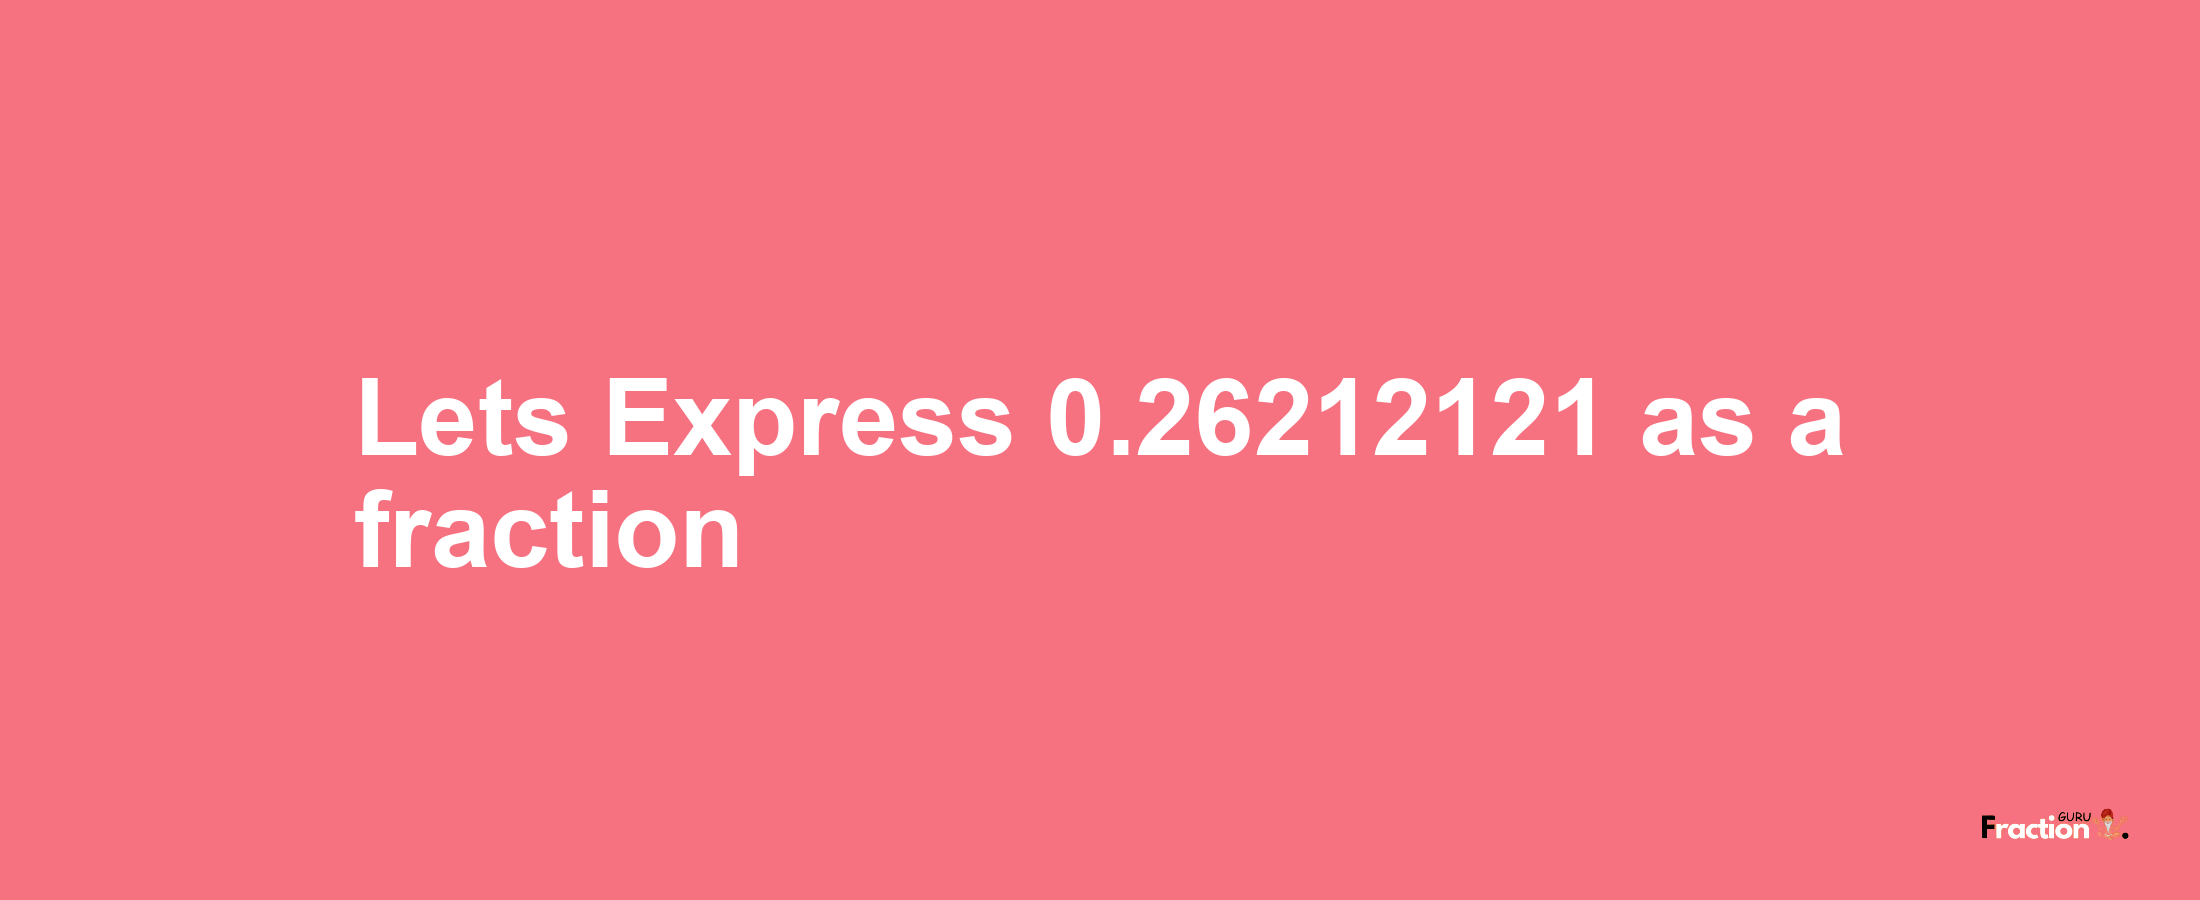 Lets Express 0.26212121 as afraction